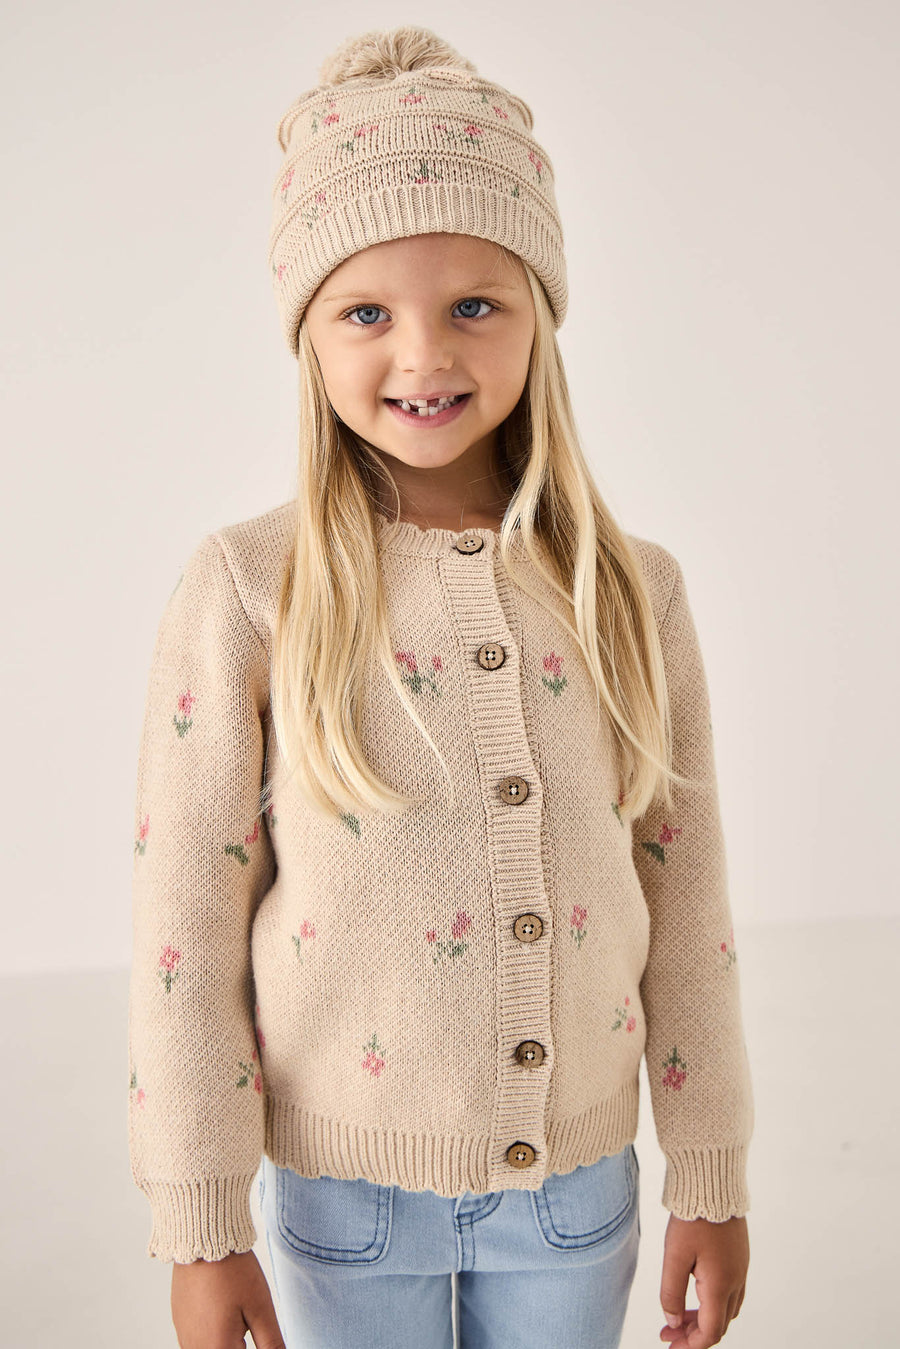 Delilah Knitted Hat - Delilah Jacquard Oatmeal Marle Childrens Hat from Jamie Kay NZ